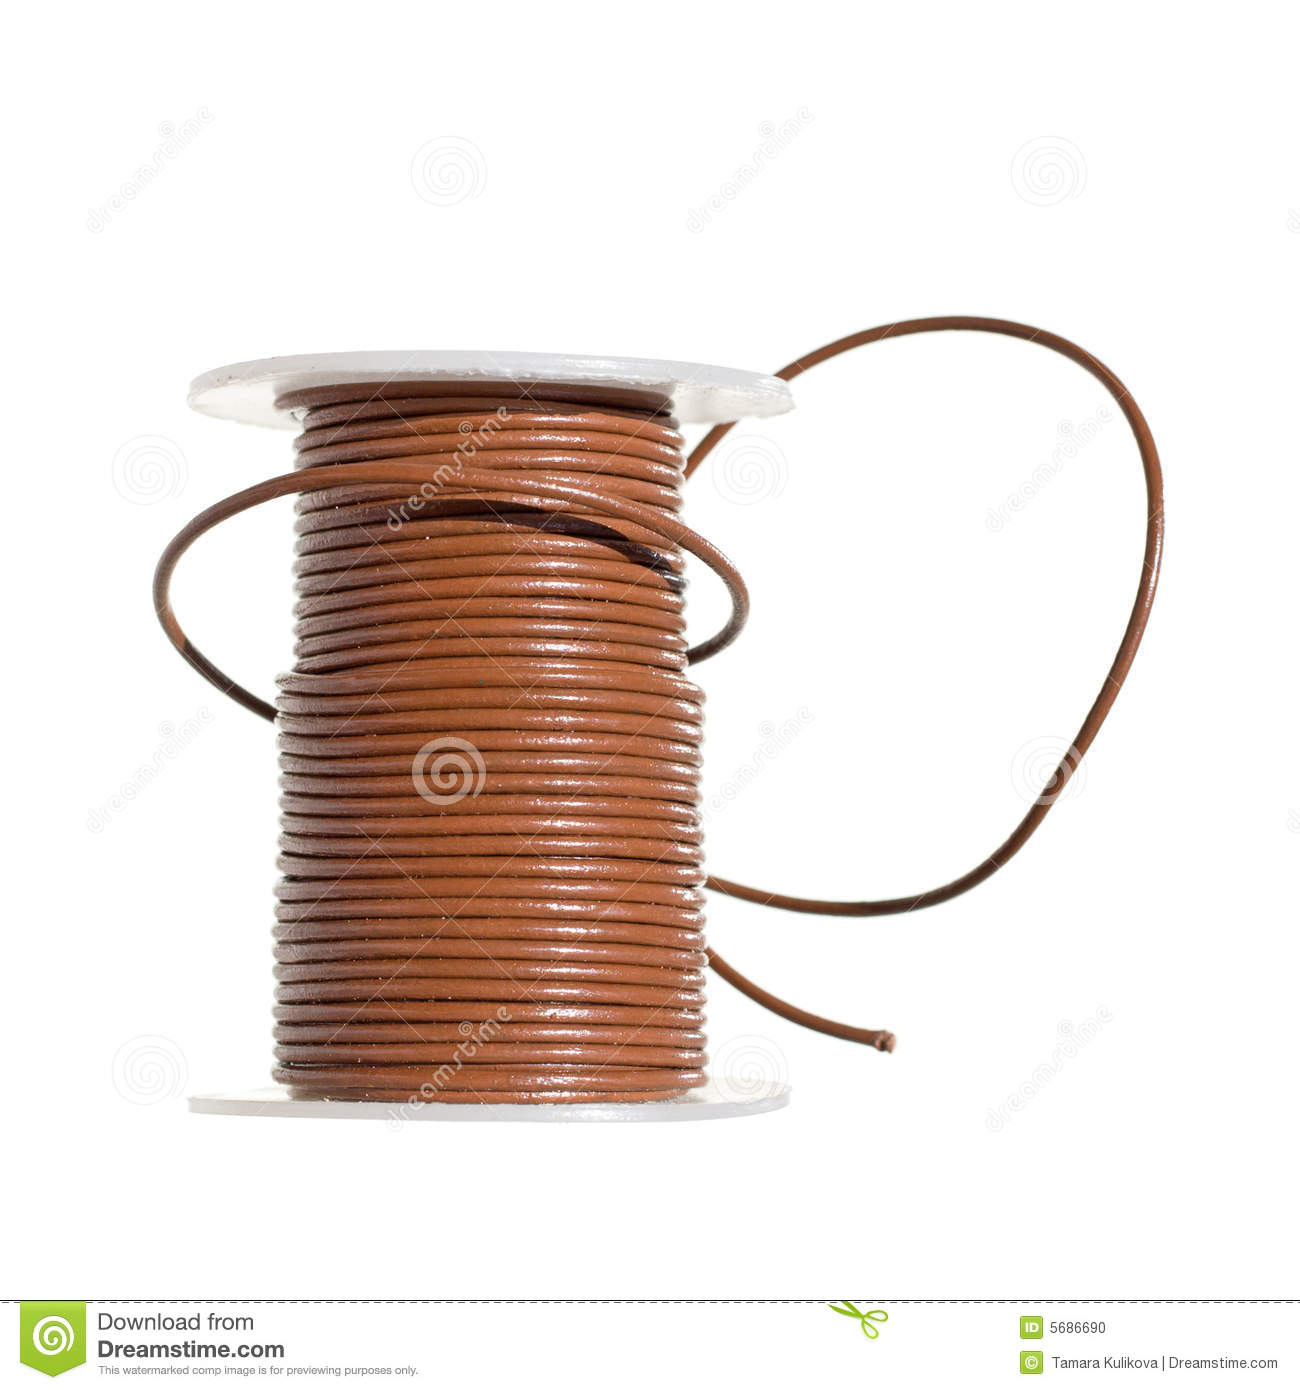 Craft Materials   Leather Cord Stock Photo   Image  5686690